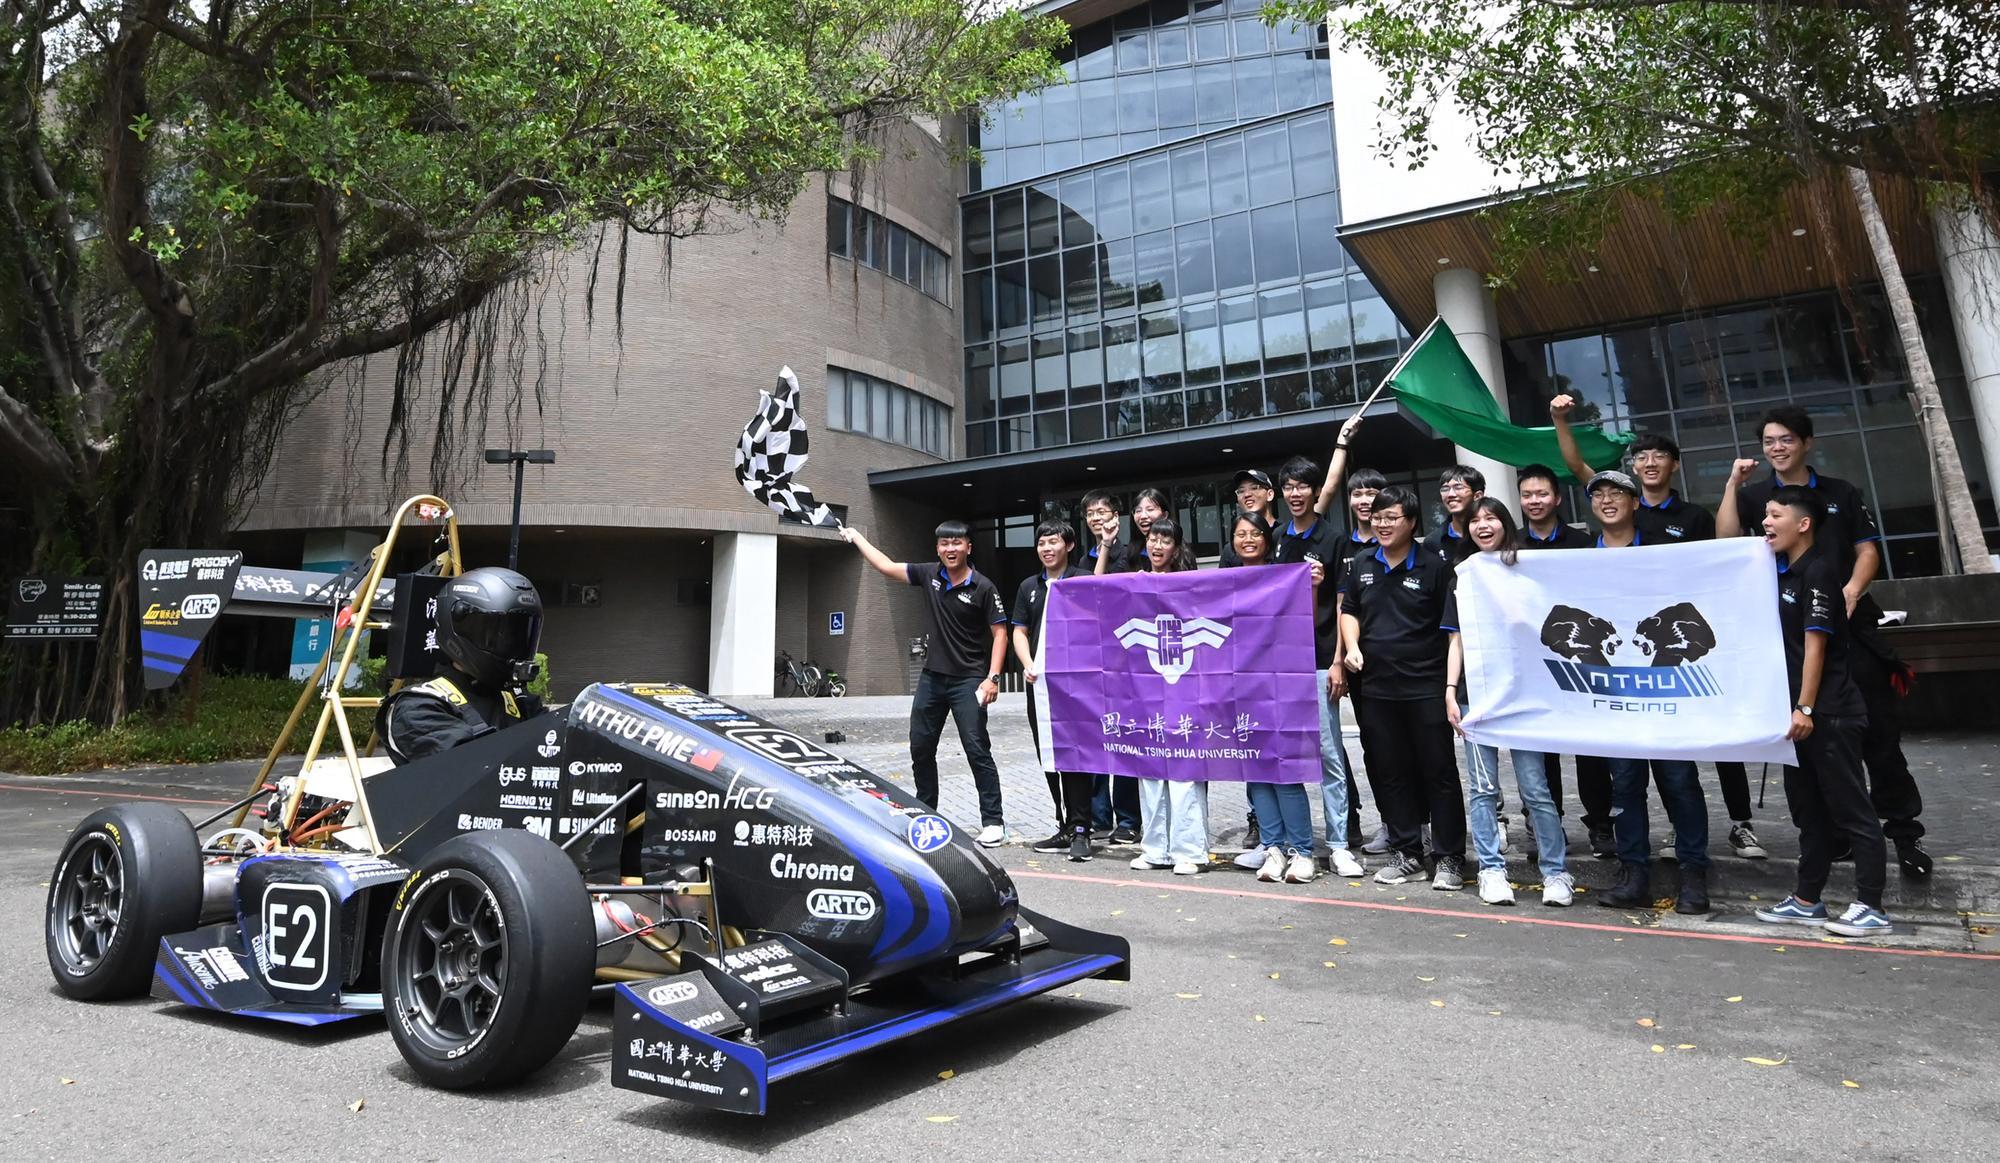 Student club NTHU Racing is an excellent example of interdisciplinary work.